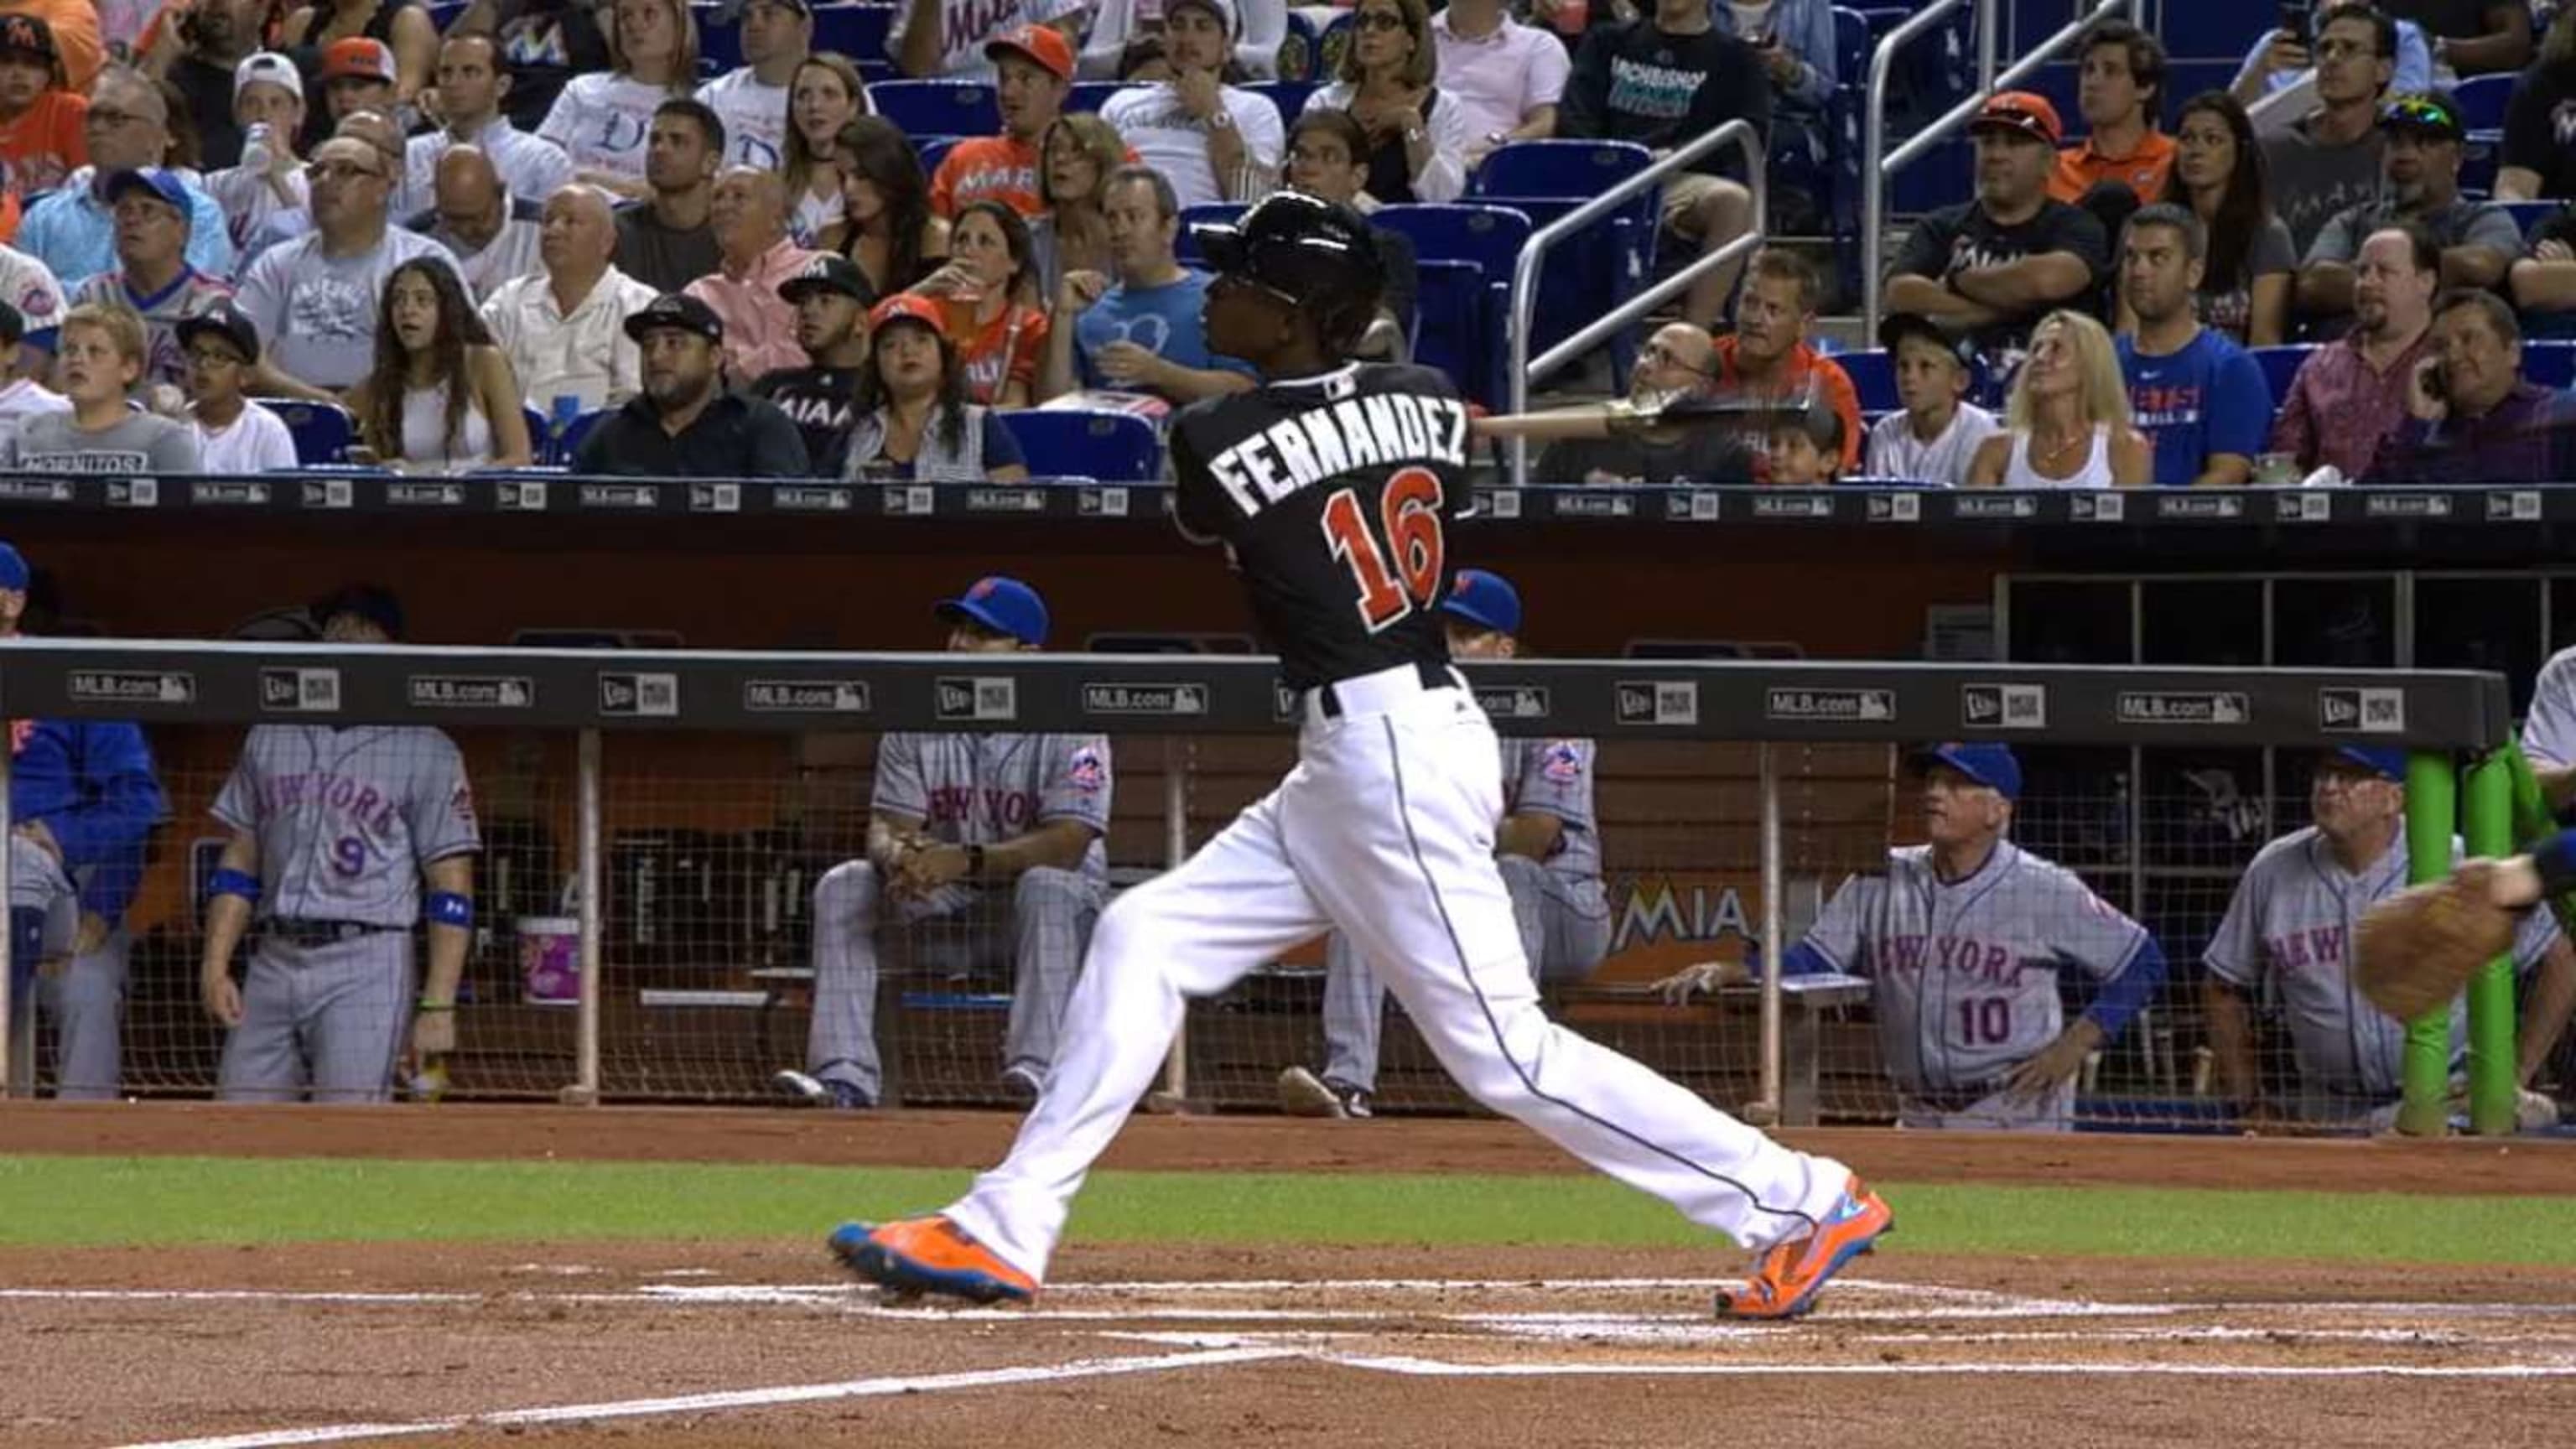 The baseball world reacts to Dee Gordon's incredible lead-off home